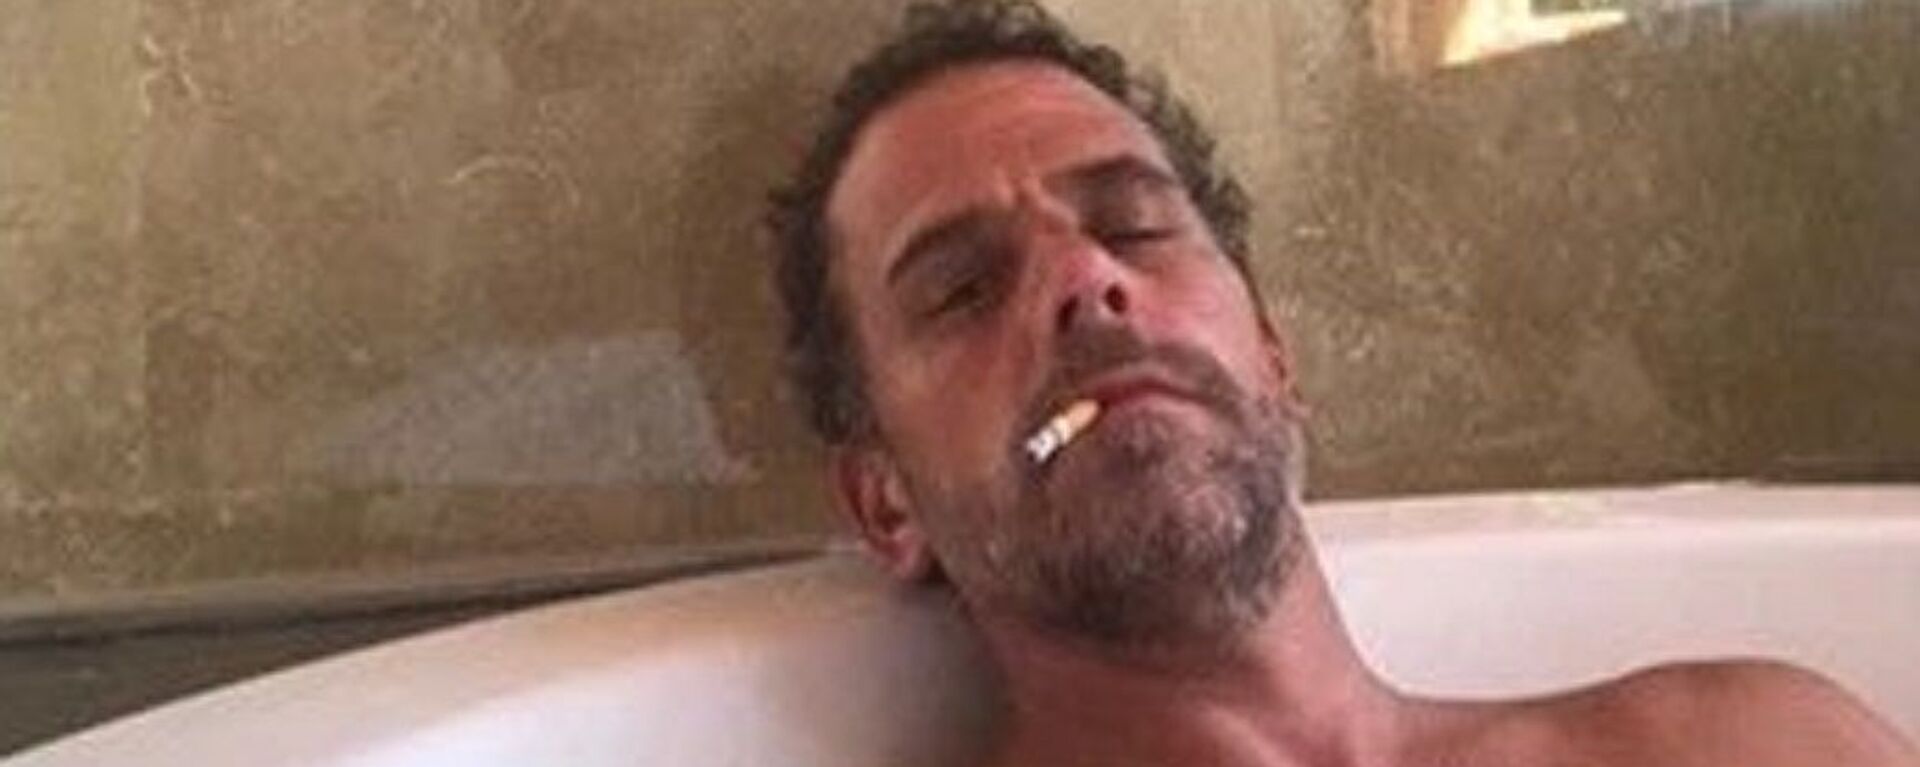 Photo of Hunter Biden relaxing in a bathtub, reportedly taken from a computer dropped off at a Delaware computer repair shop. - Sputnik International, 1920, 07.05.2022